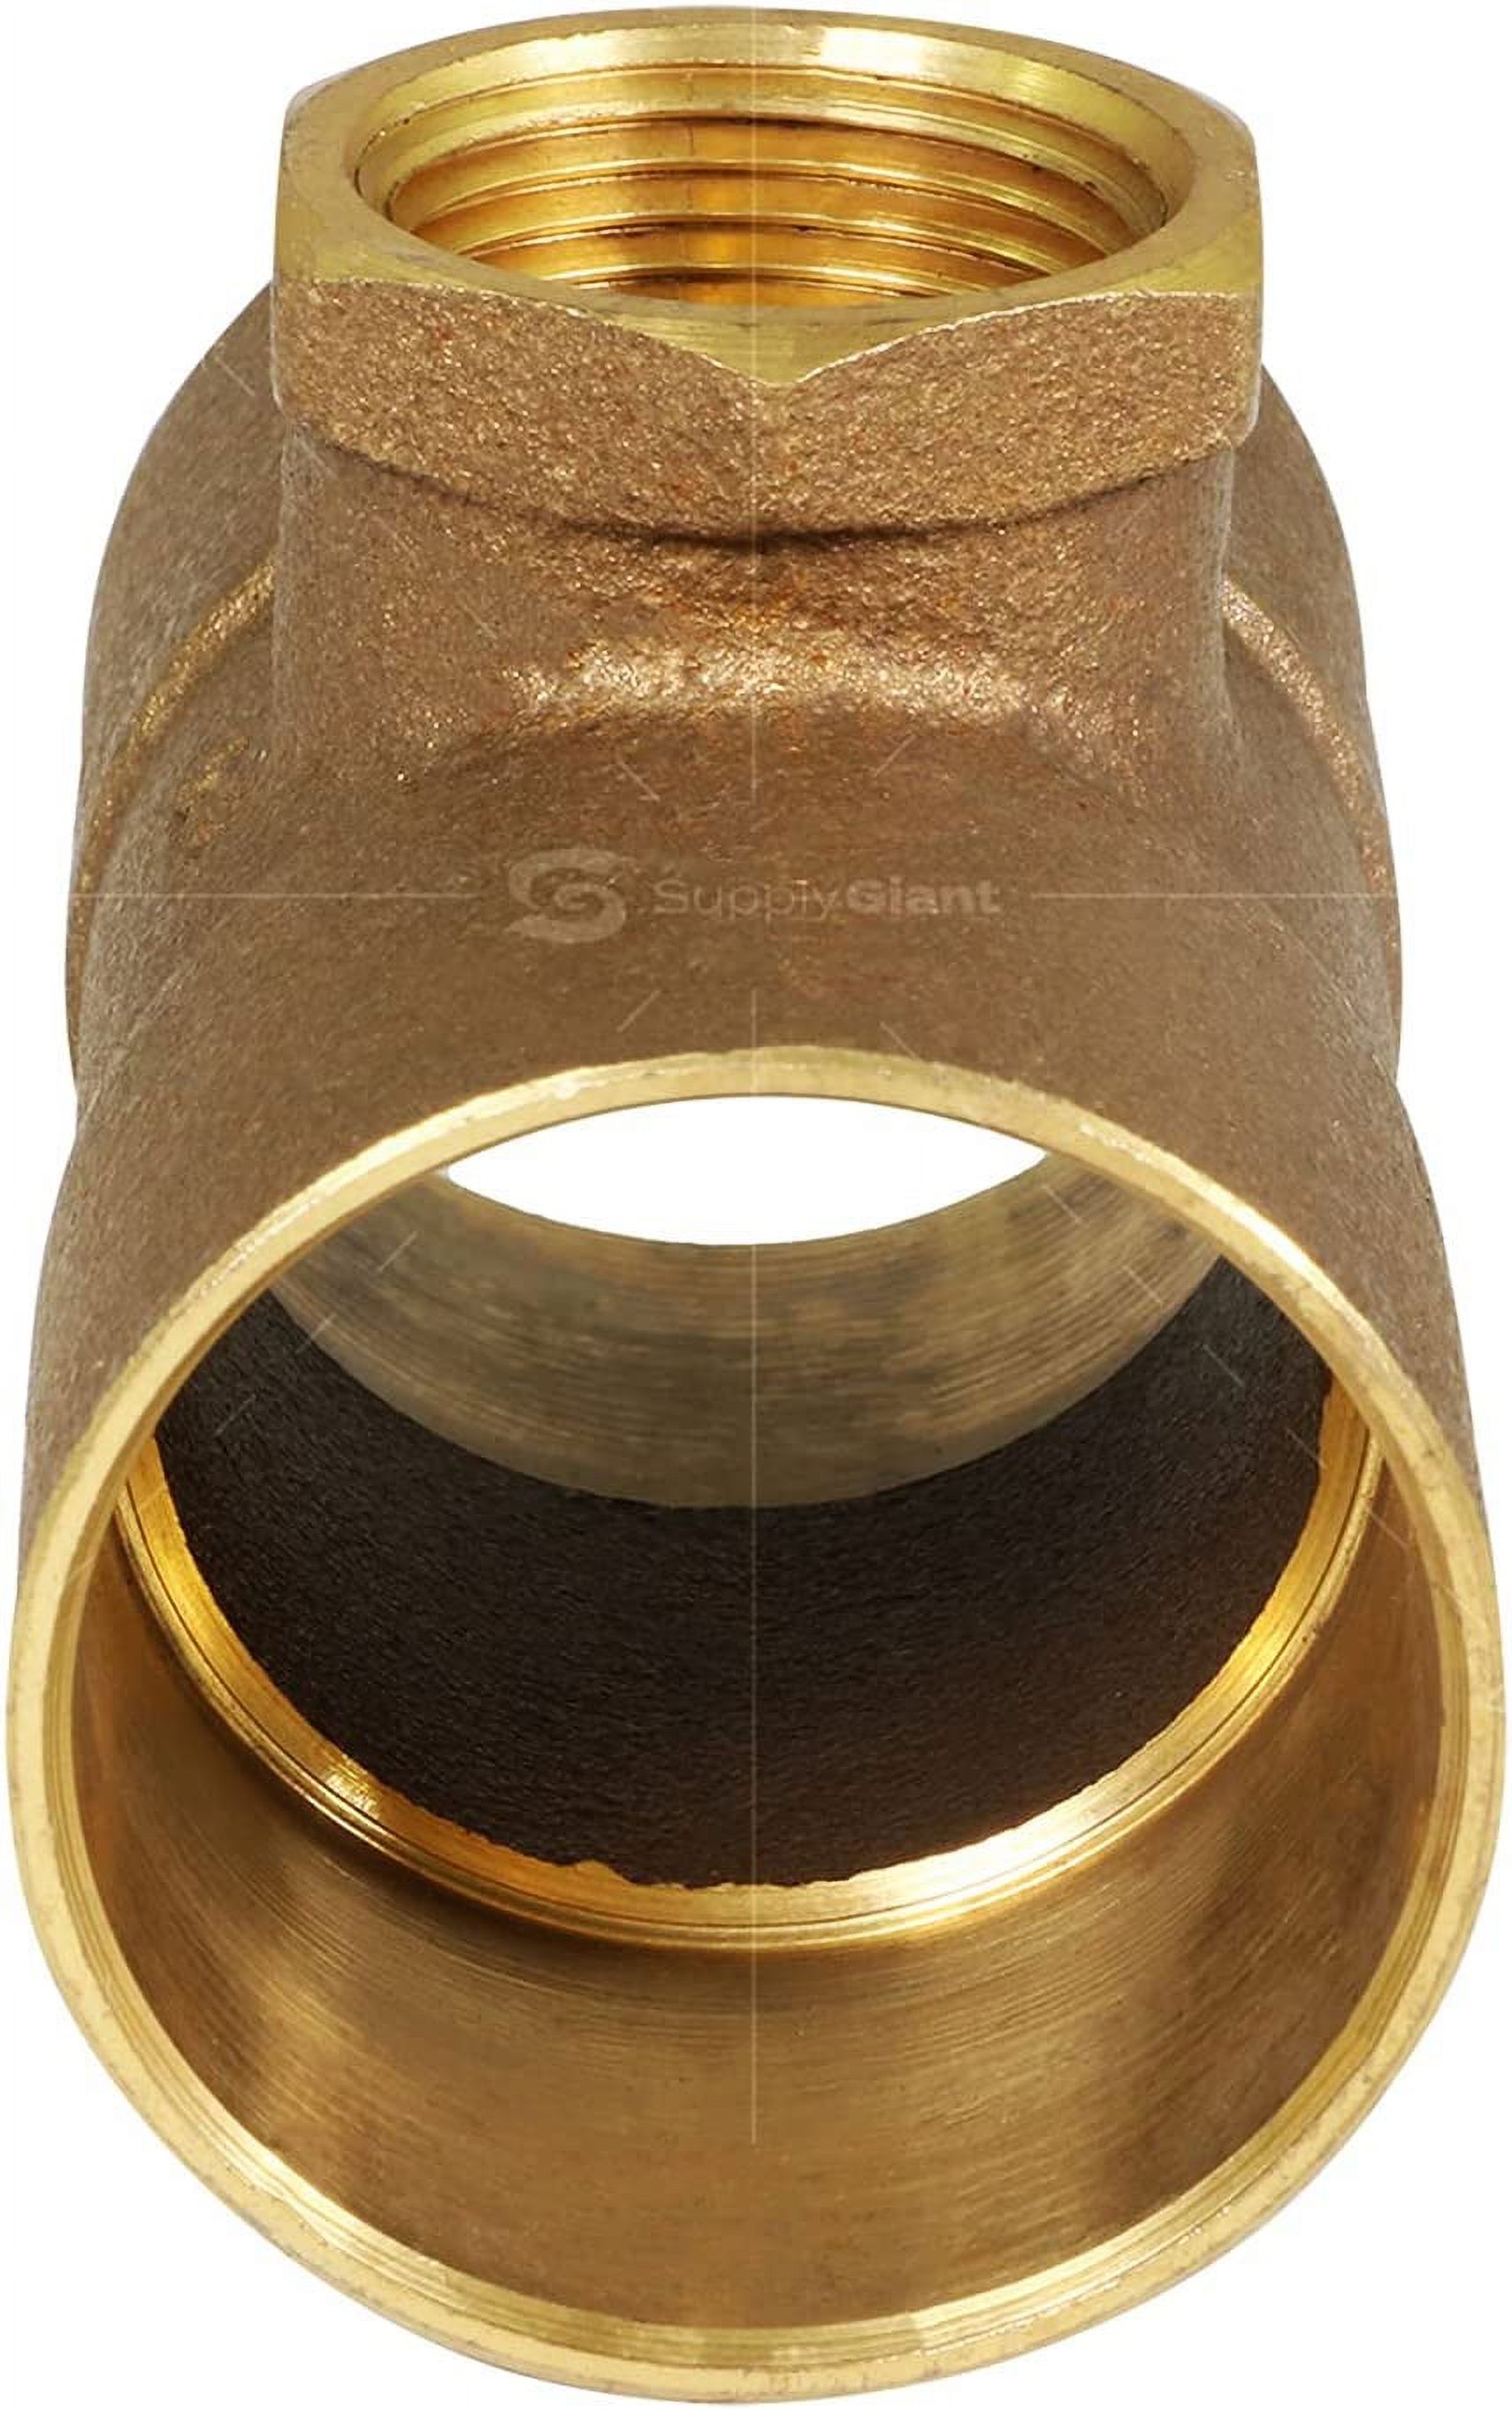 Supply Giant CCFT1213-NL CXCXF Lead Free Cast Brass Tee Fitting with Solder Cups and Female Threaded Branch, 1-1/2" x 1-1/2" x 3/4" - image 2 of 6